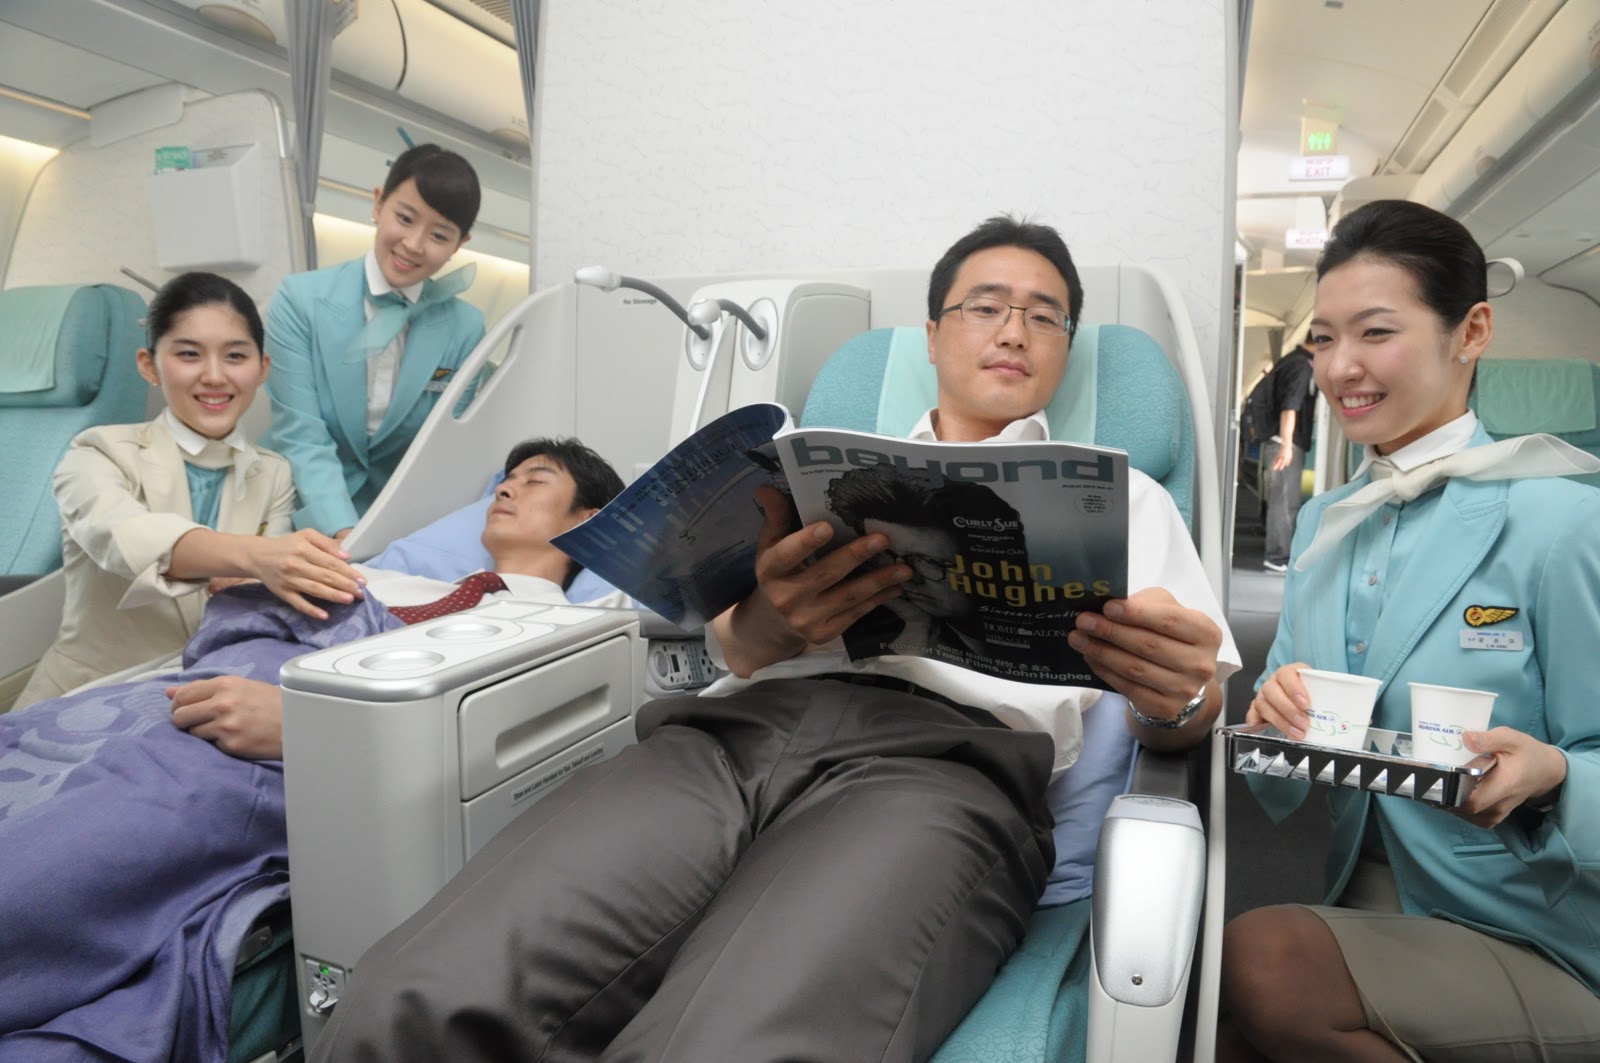 Korean Air's First Class Experience - Character Media